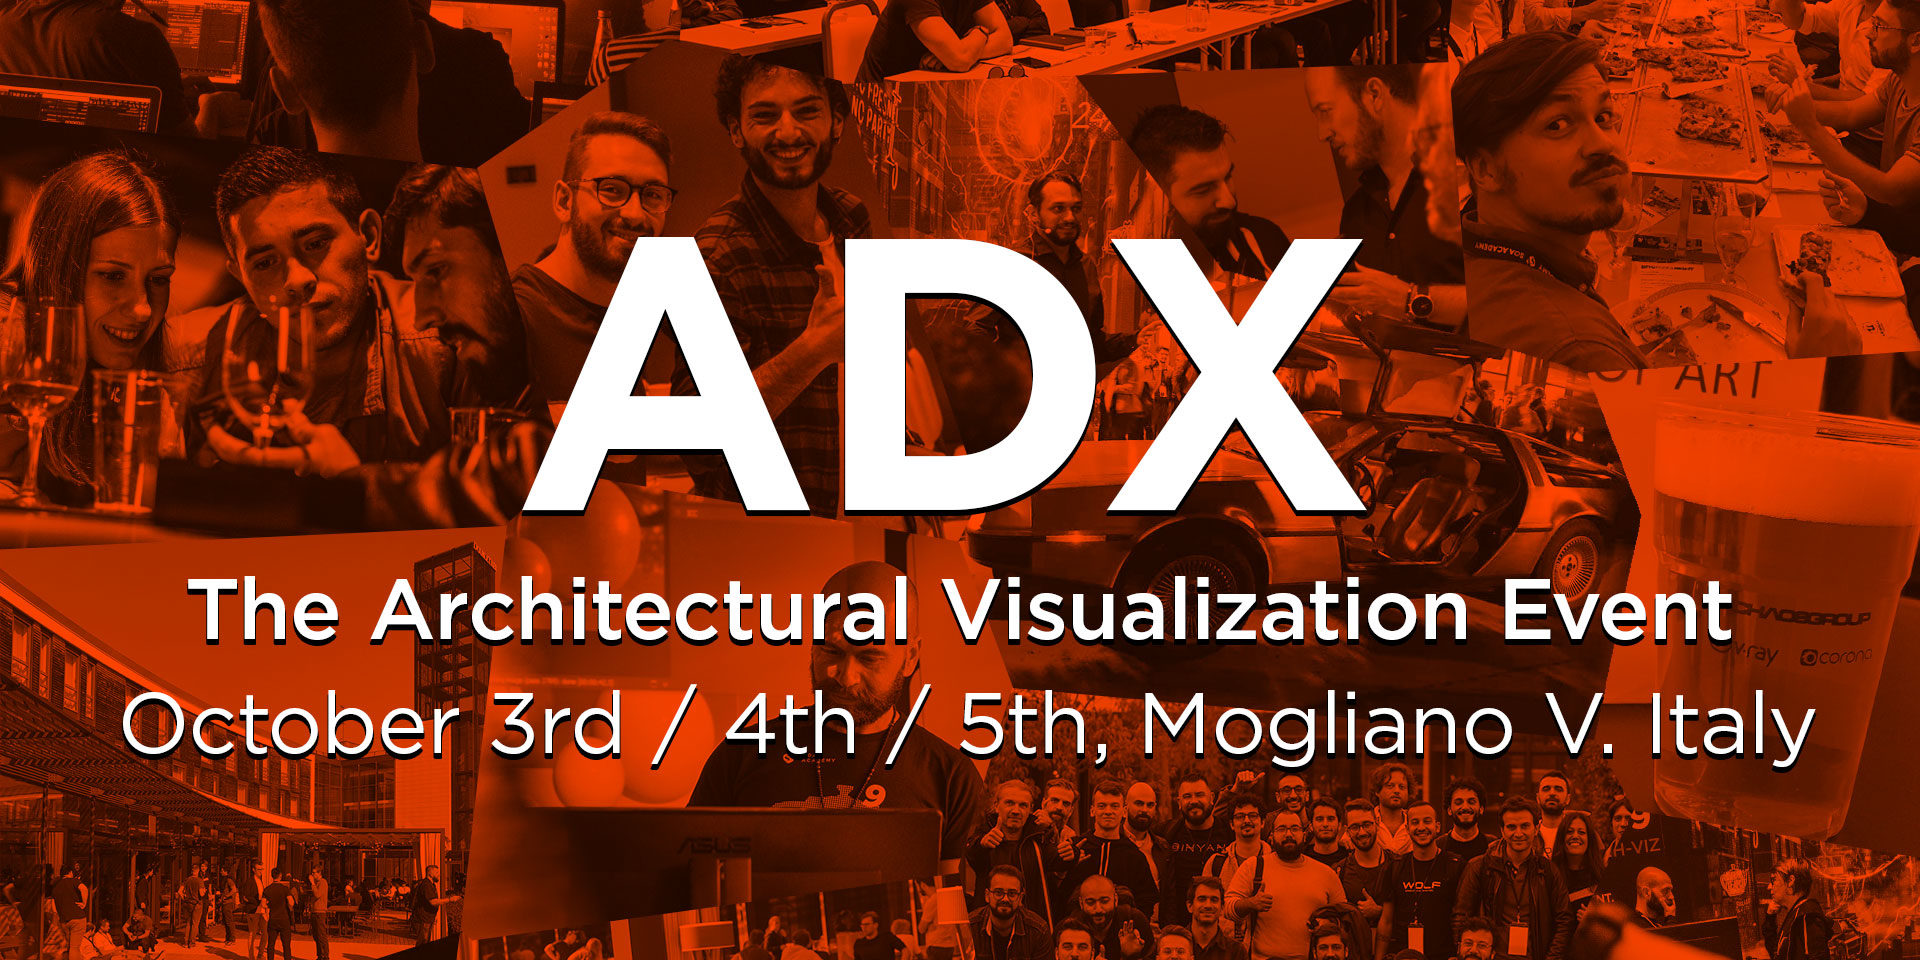 ADX - The Architectural Visualization Event